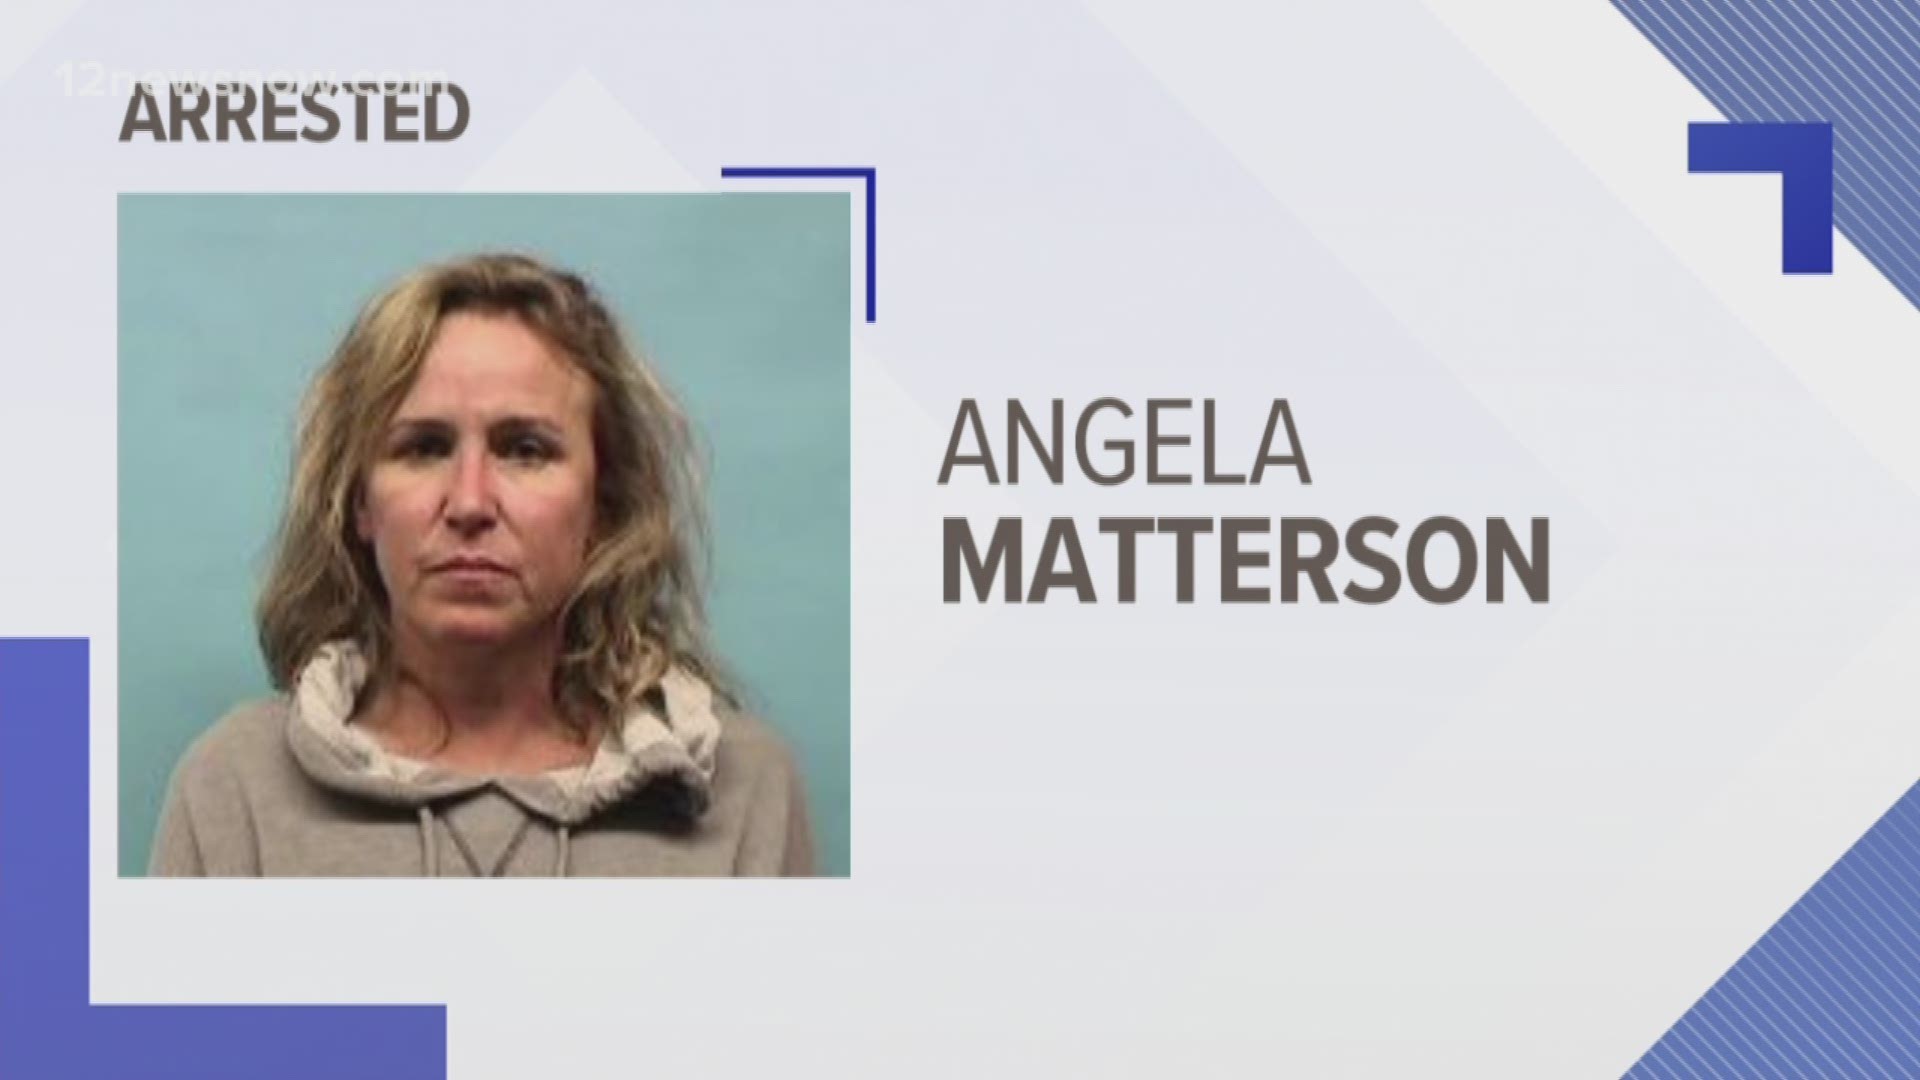 Angela Matterson was arrested and is now charged with careless driving and driving under the influence of alcohol.